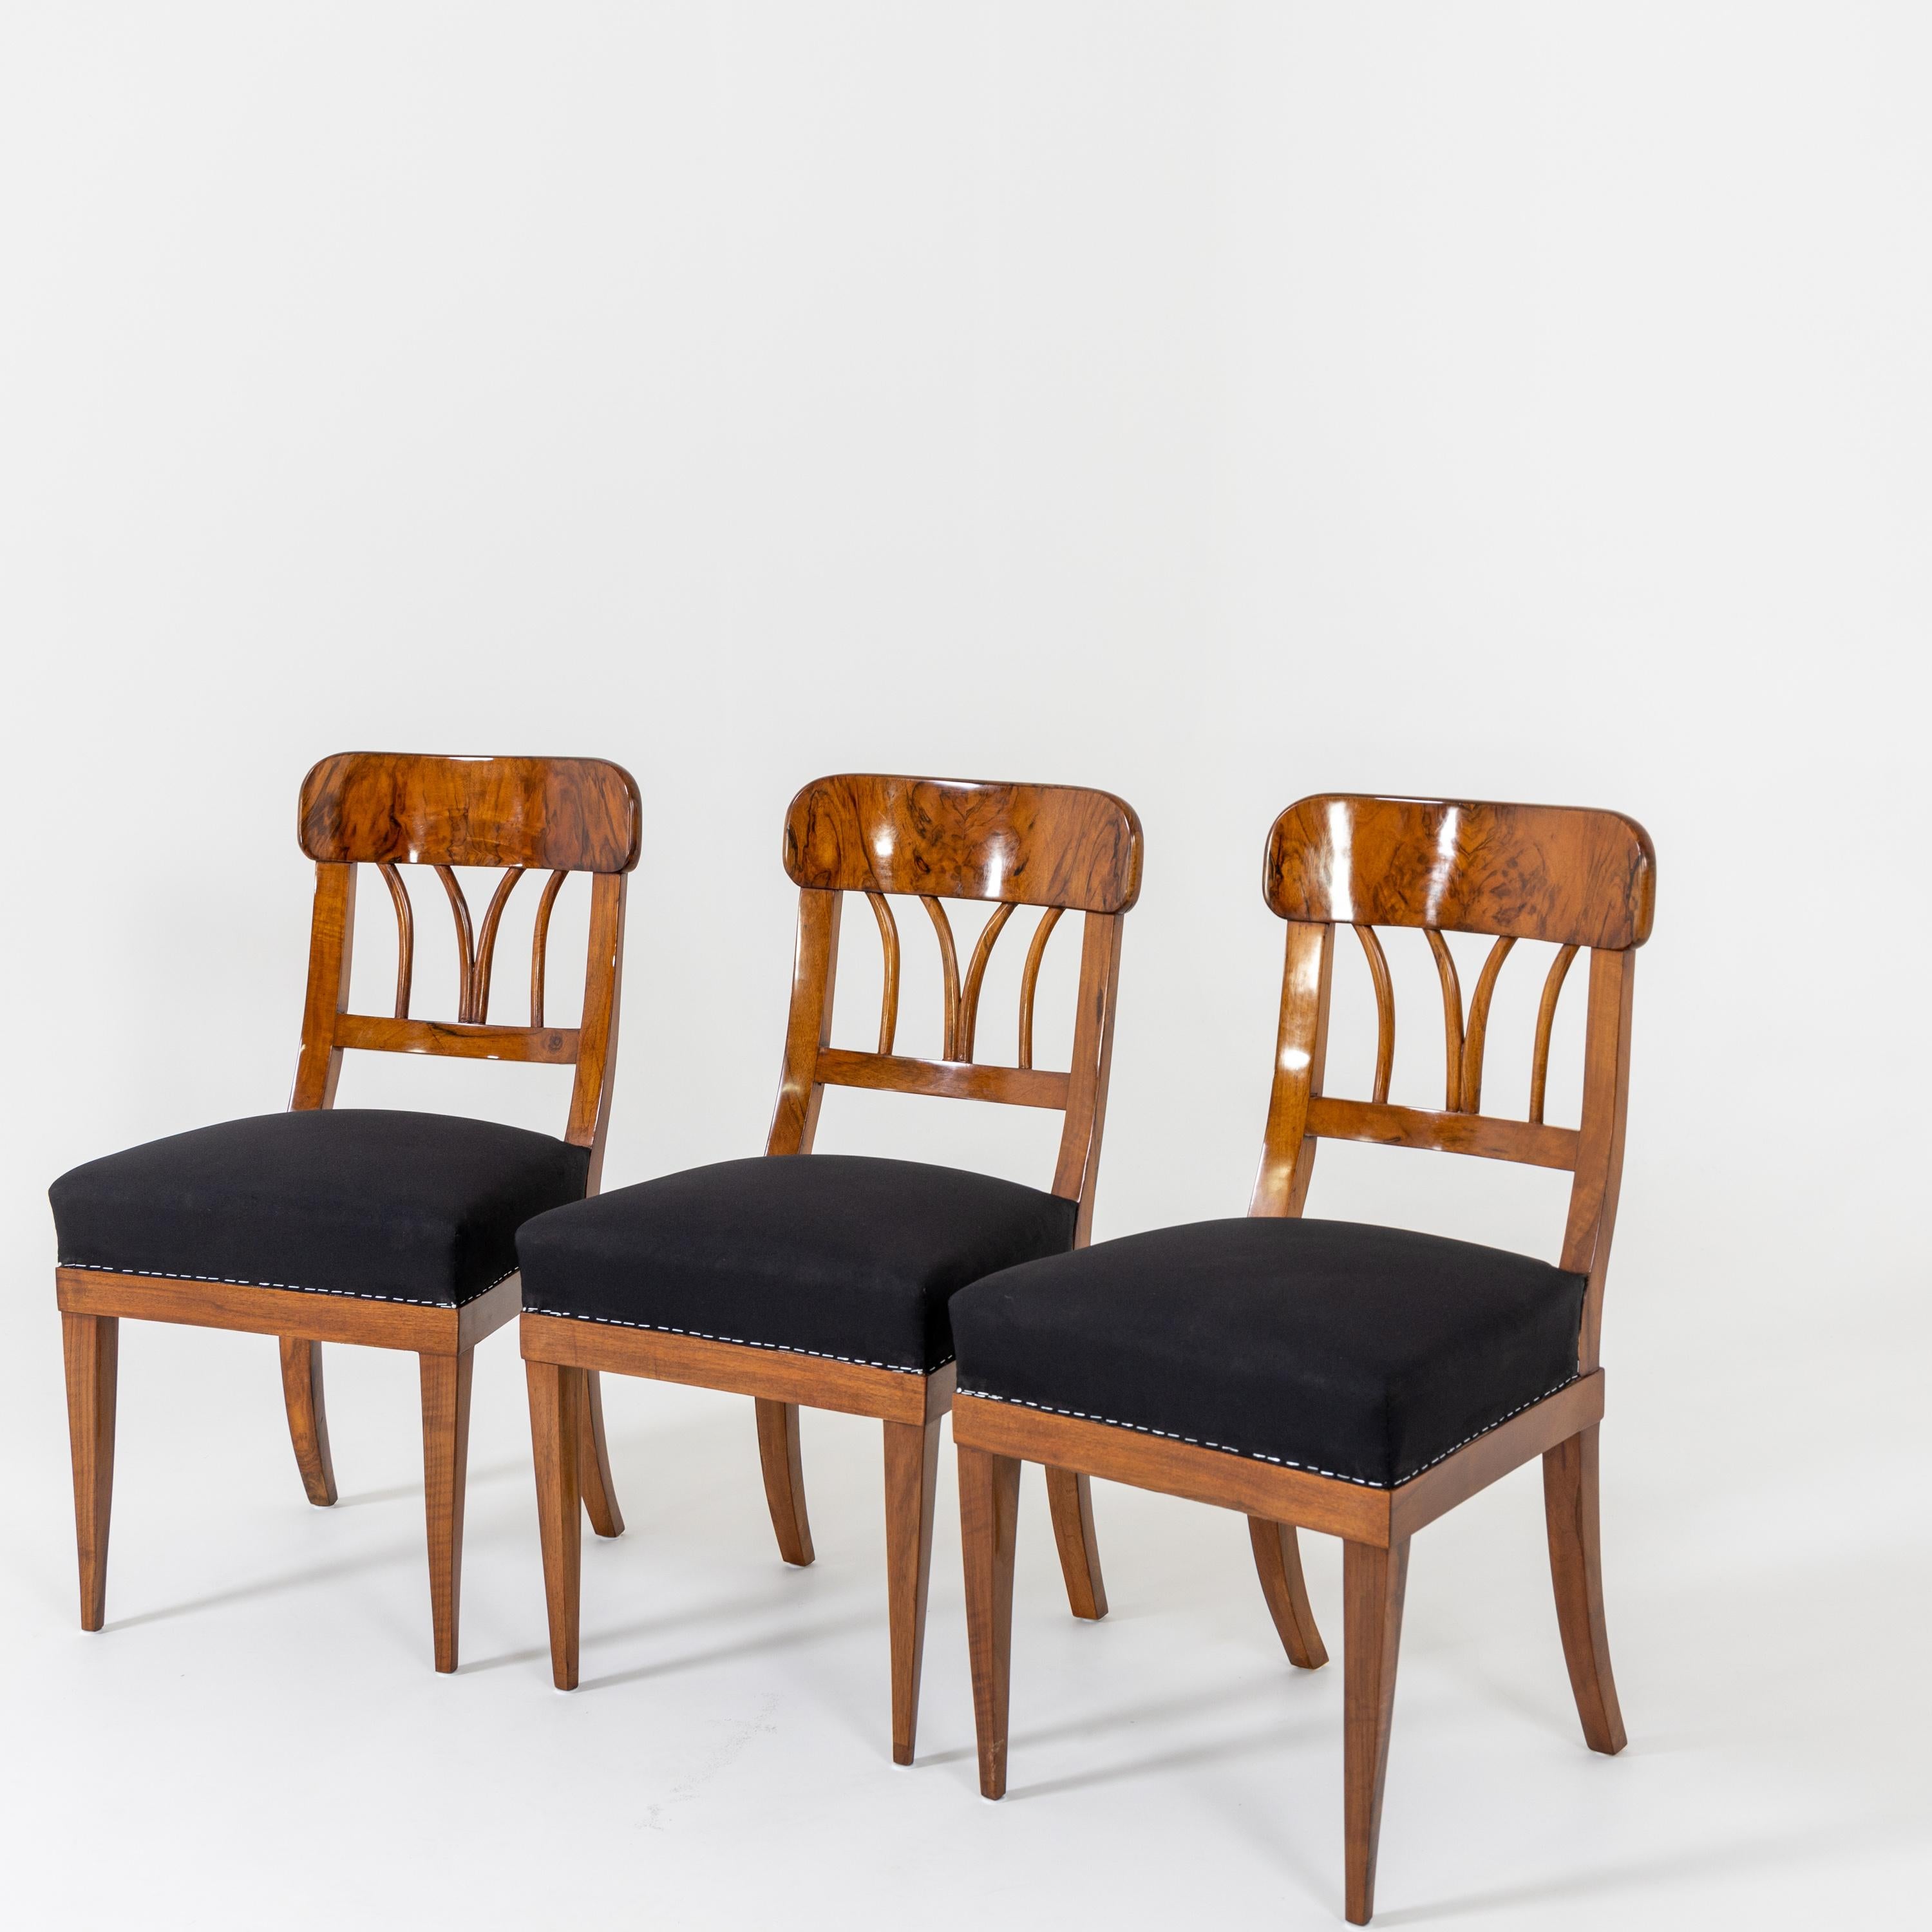 Three Biedermeier chairs in solid and veneered walnut. The chairs stand on square tapered legs and have straight frames and openwork backs with rounded top rails. The chairs were upholstered with a black base fabric.
 